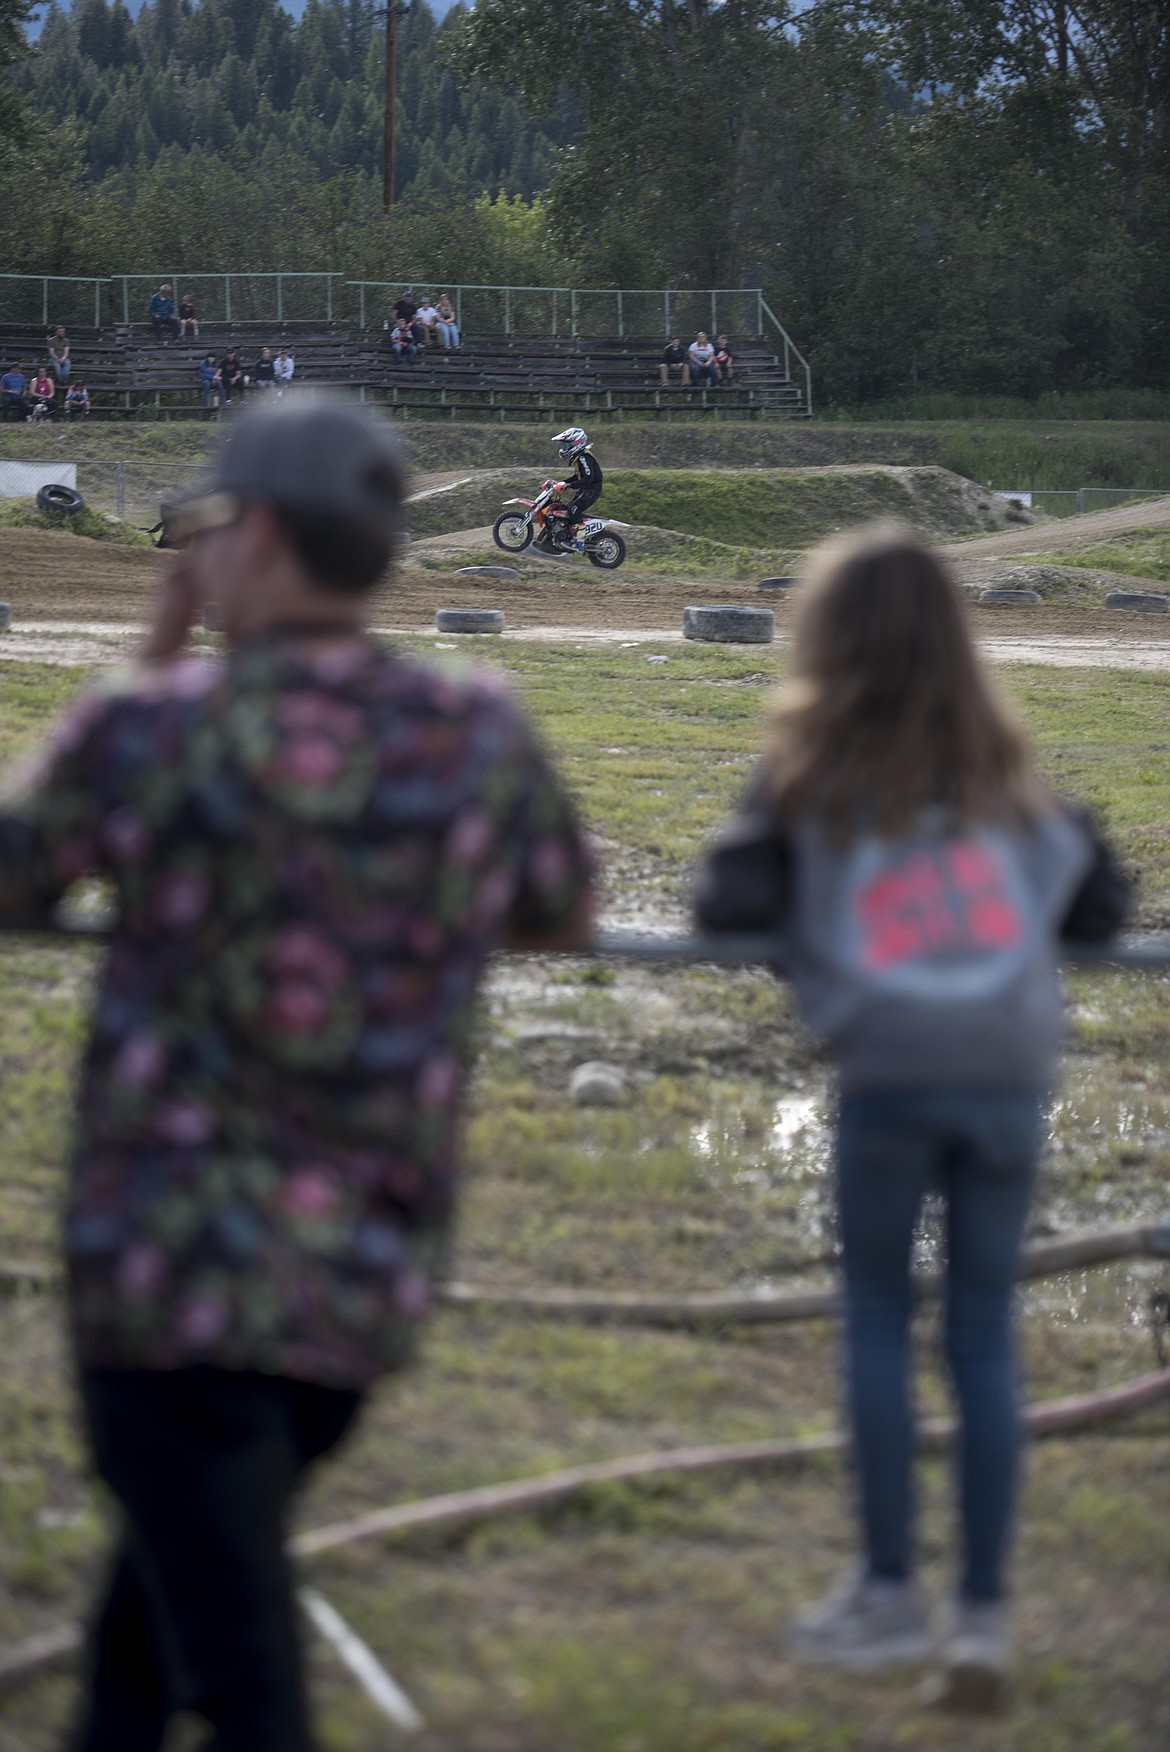 Fans watch as racers compete in the Millpond Motocross race, Saturday in Libby. (Luke Hollister/The Western News)